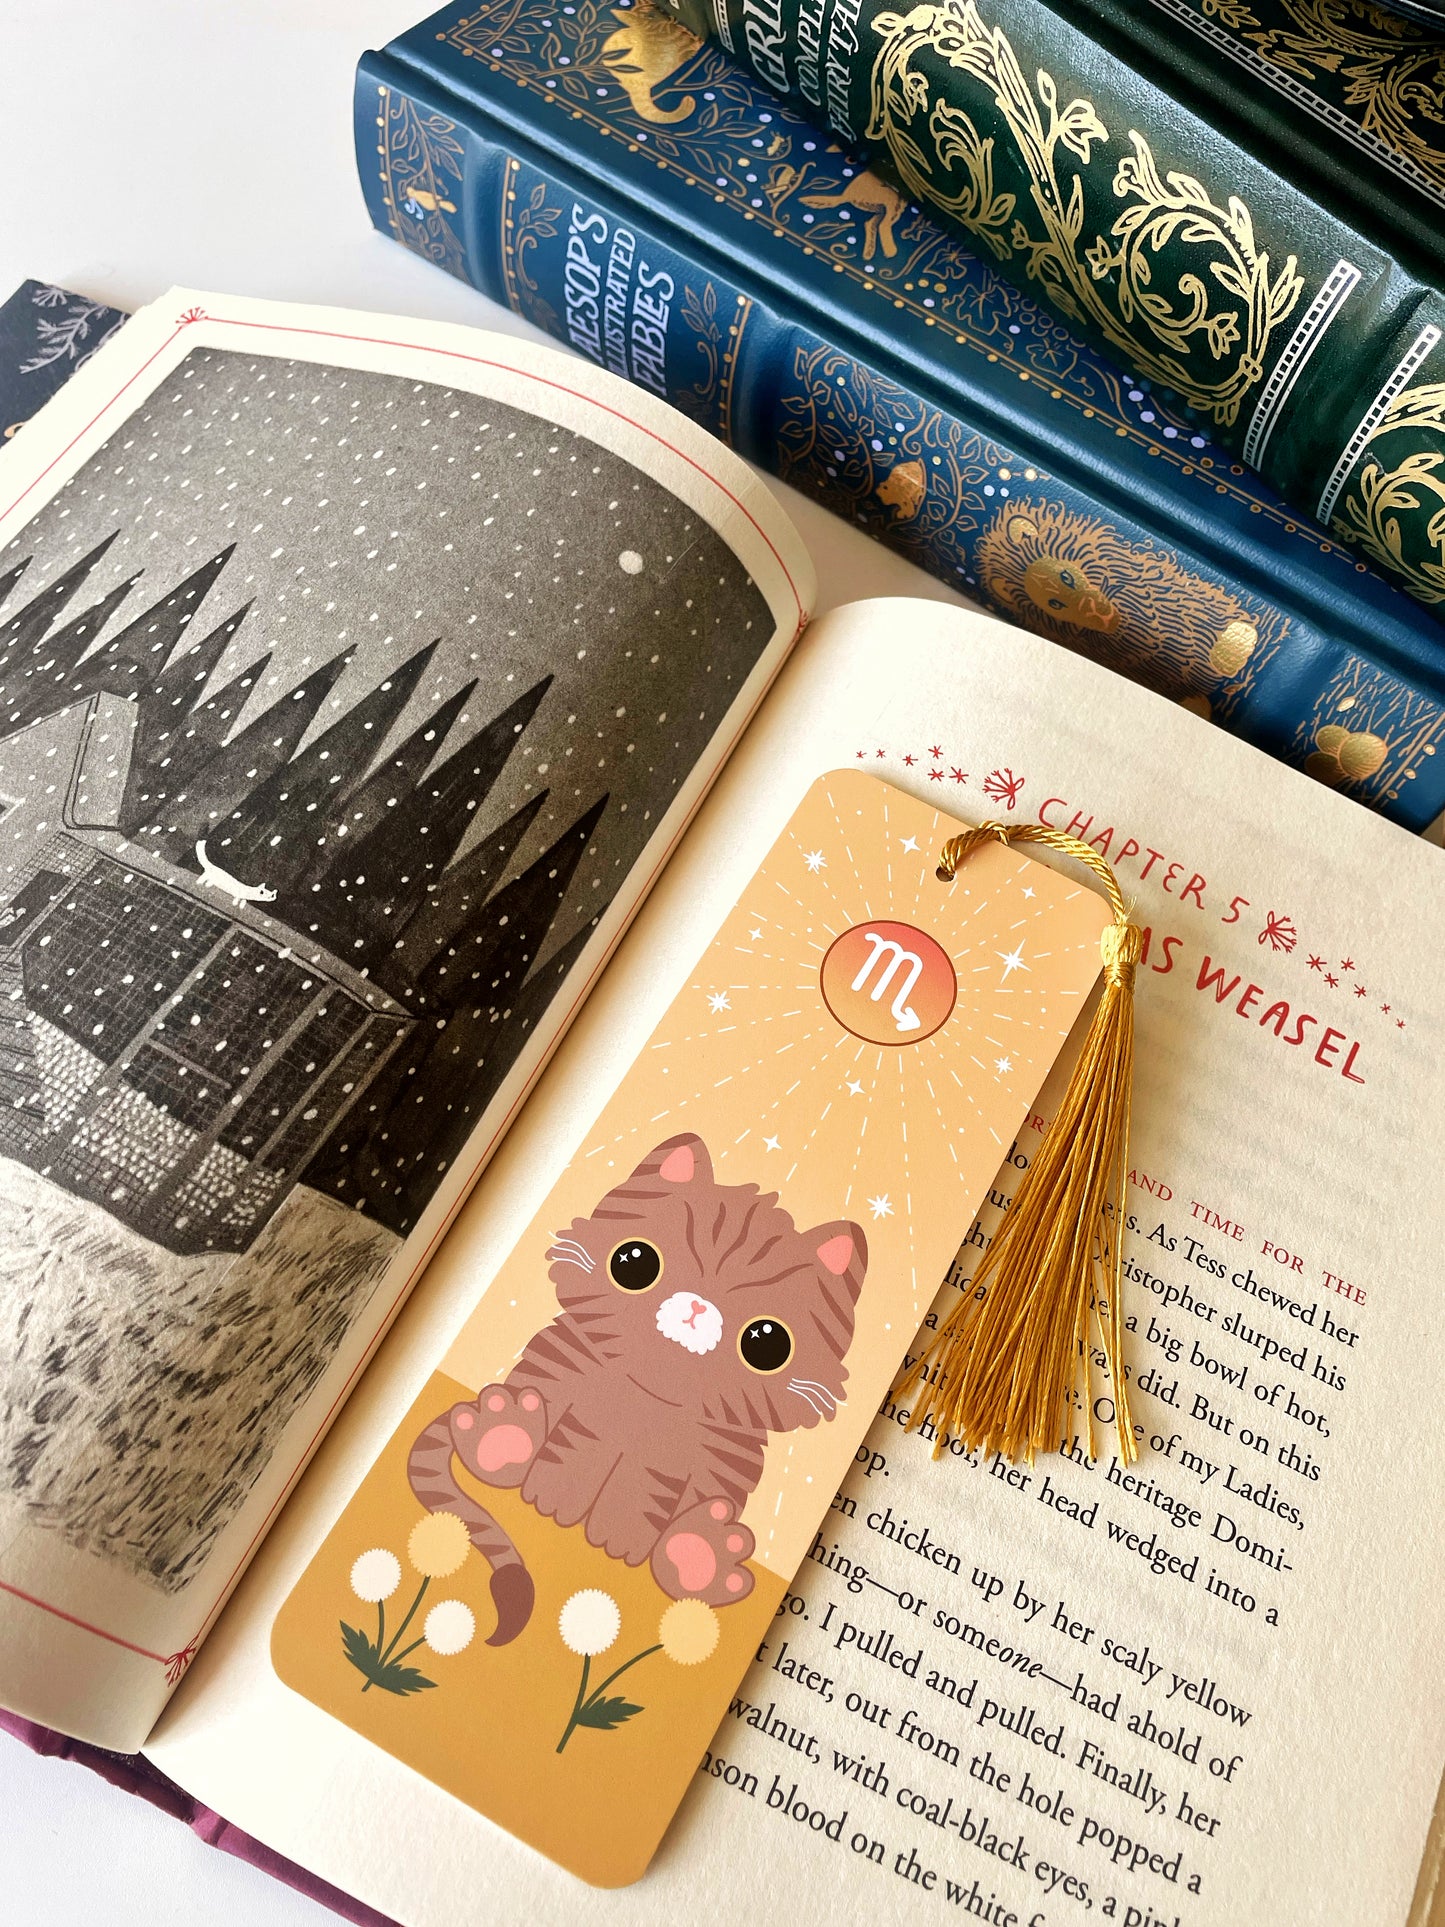 Scorpio astrology bookmark - cute cat illustrated bookmark with golden tassle pictured inside a book